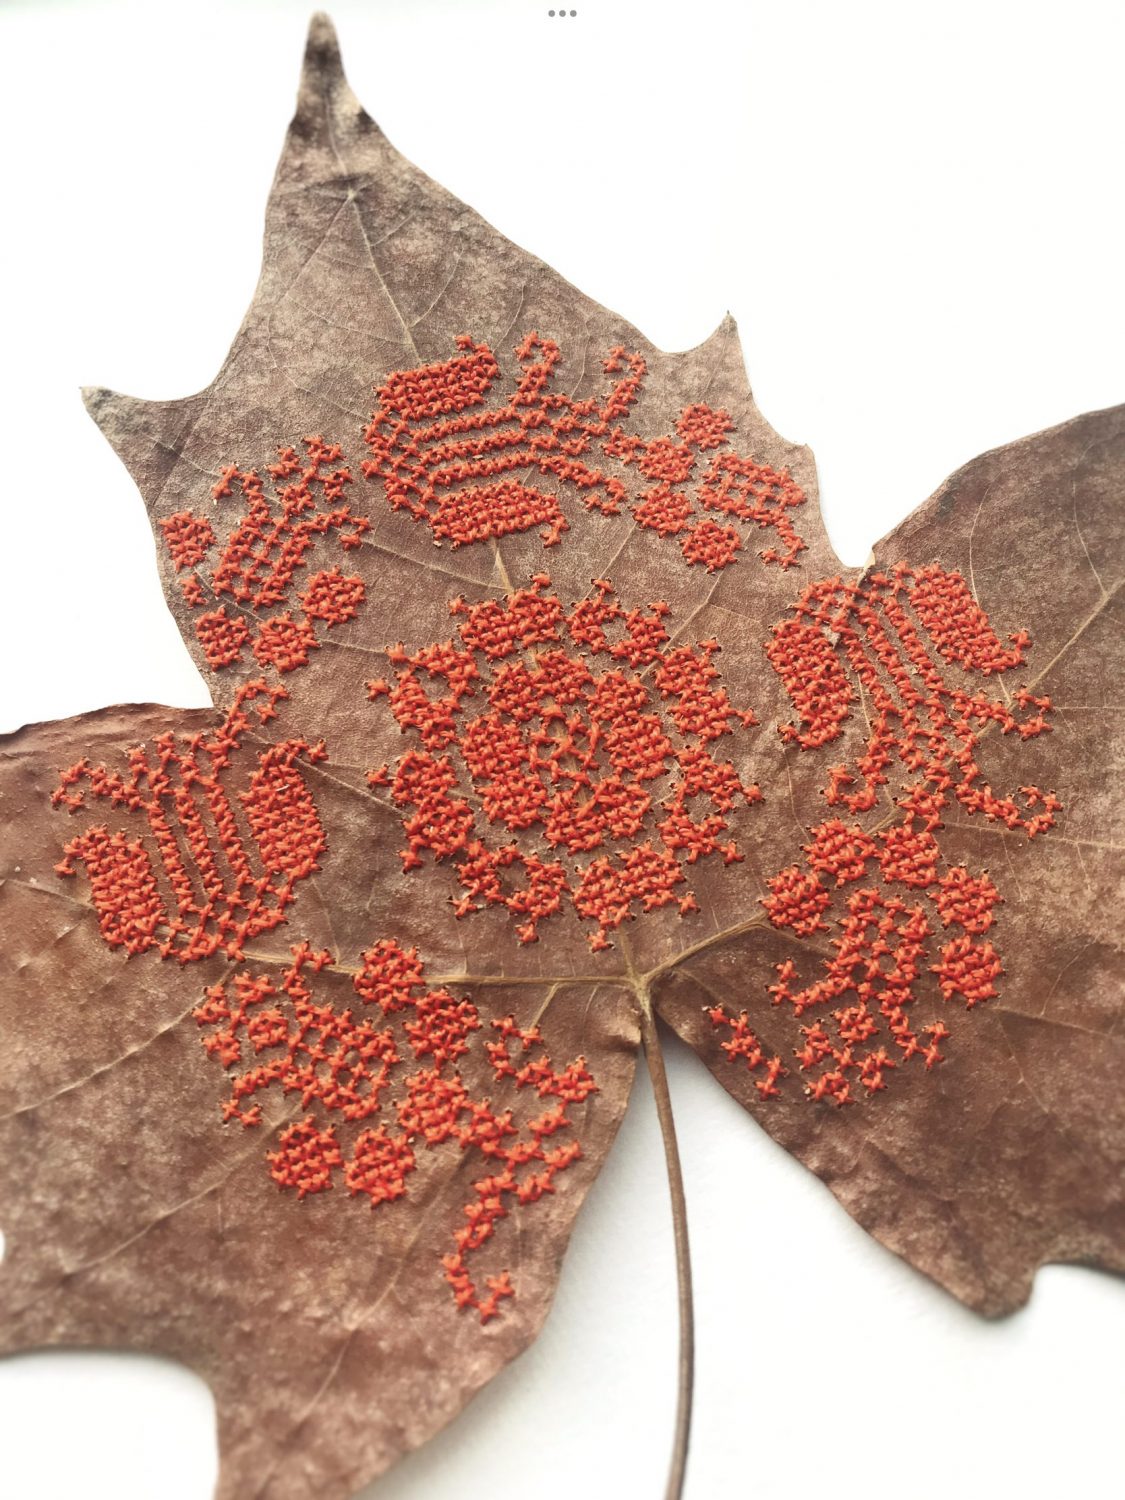 Red cross-stitch, stitched into dried leaves